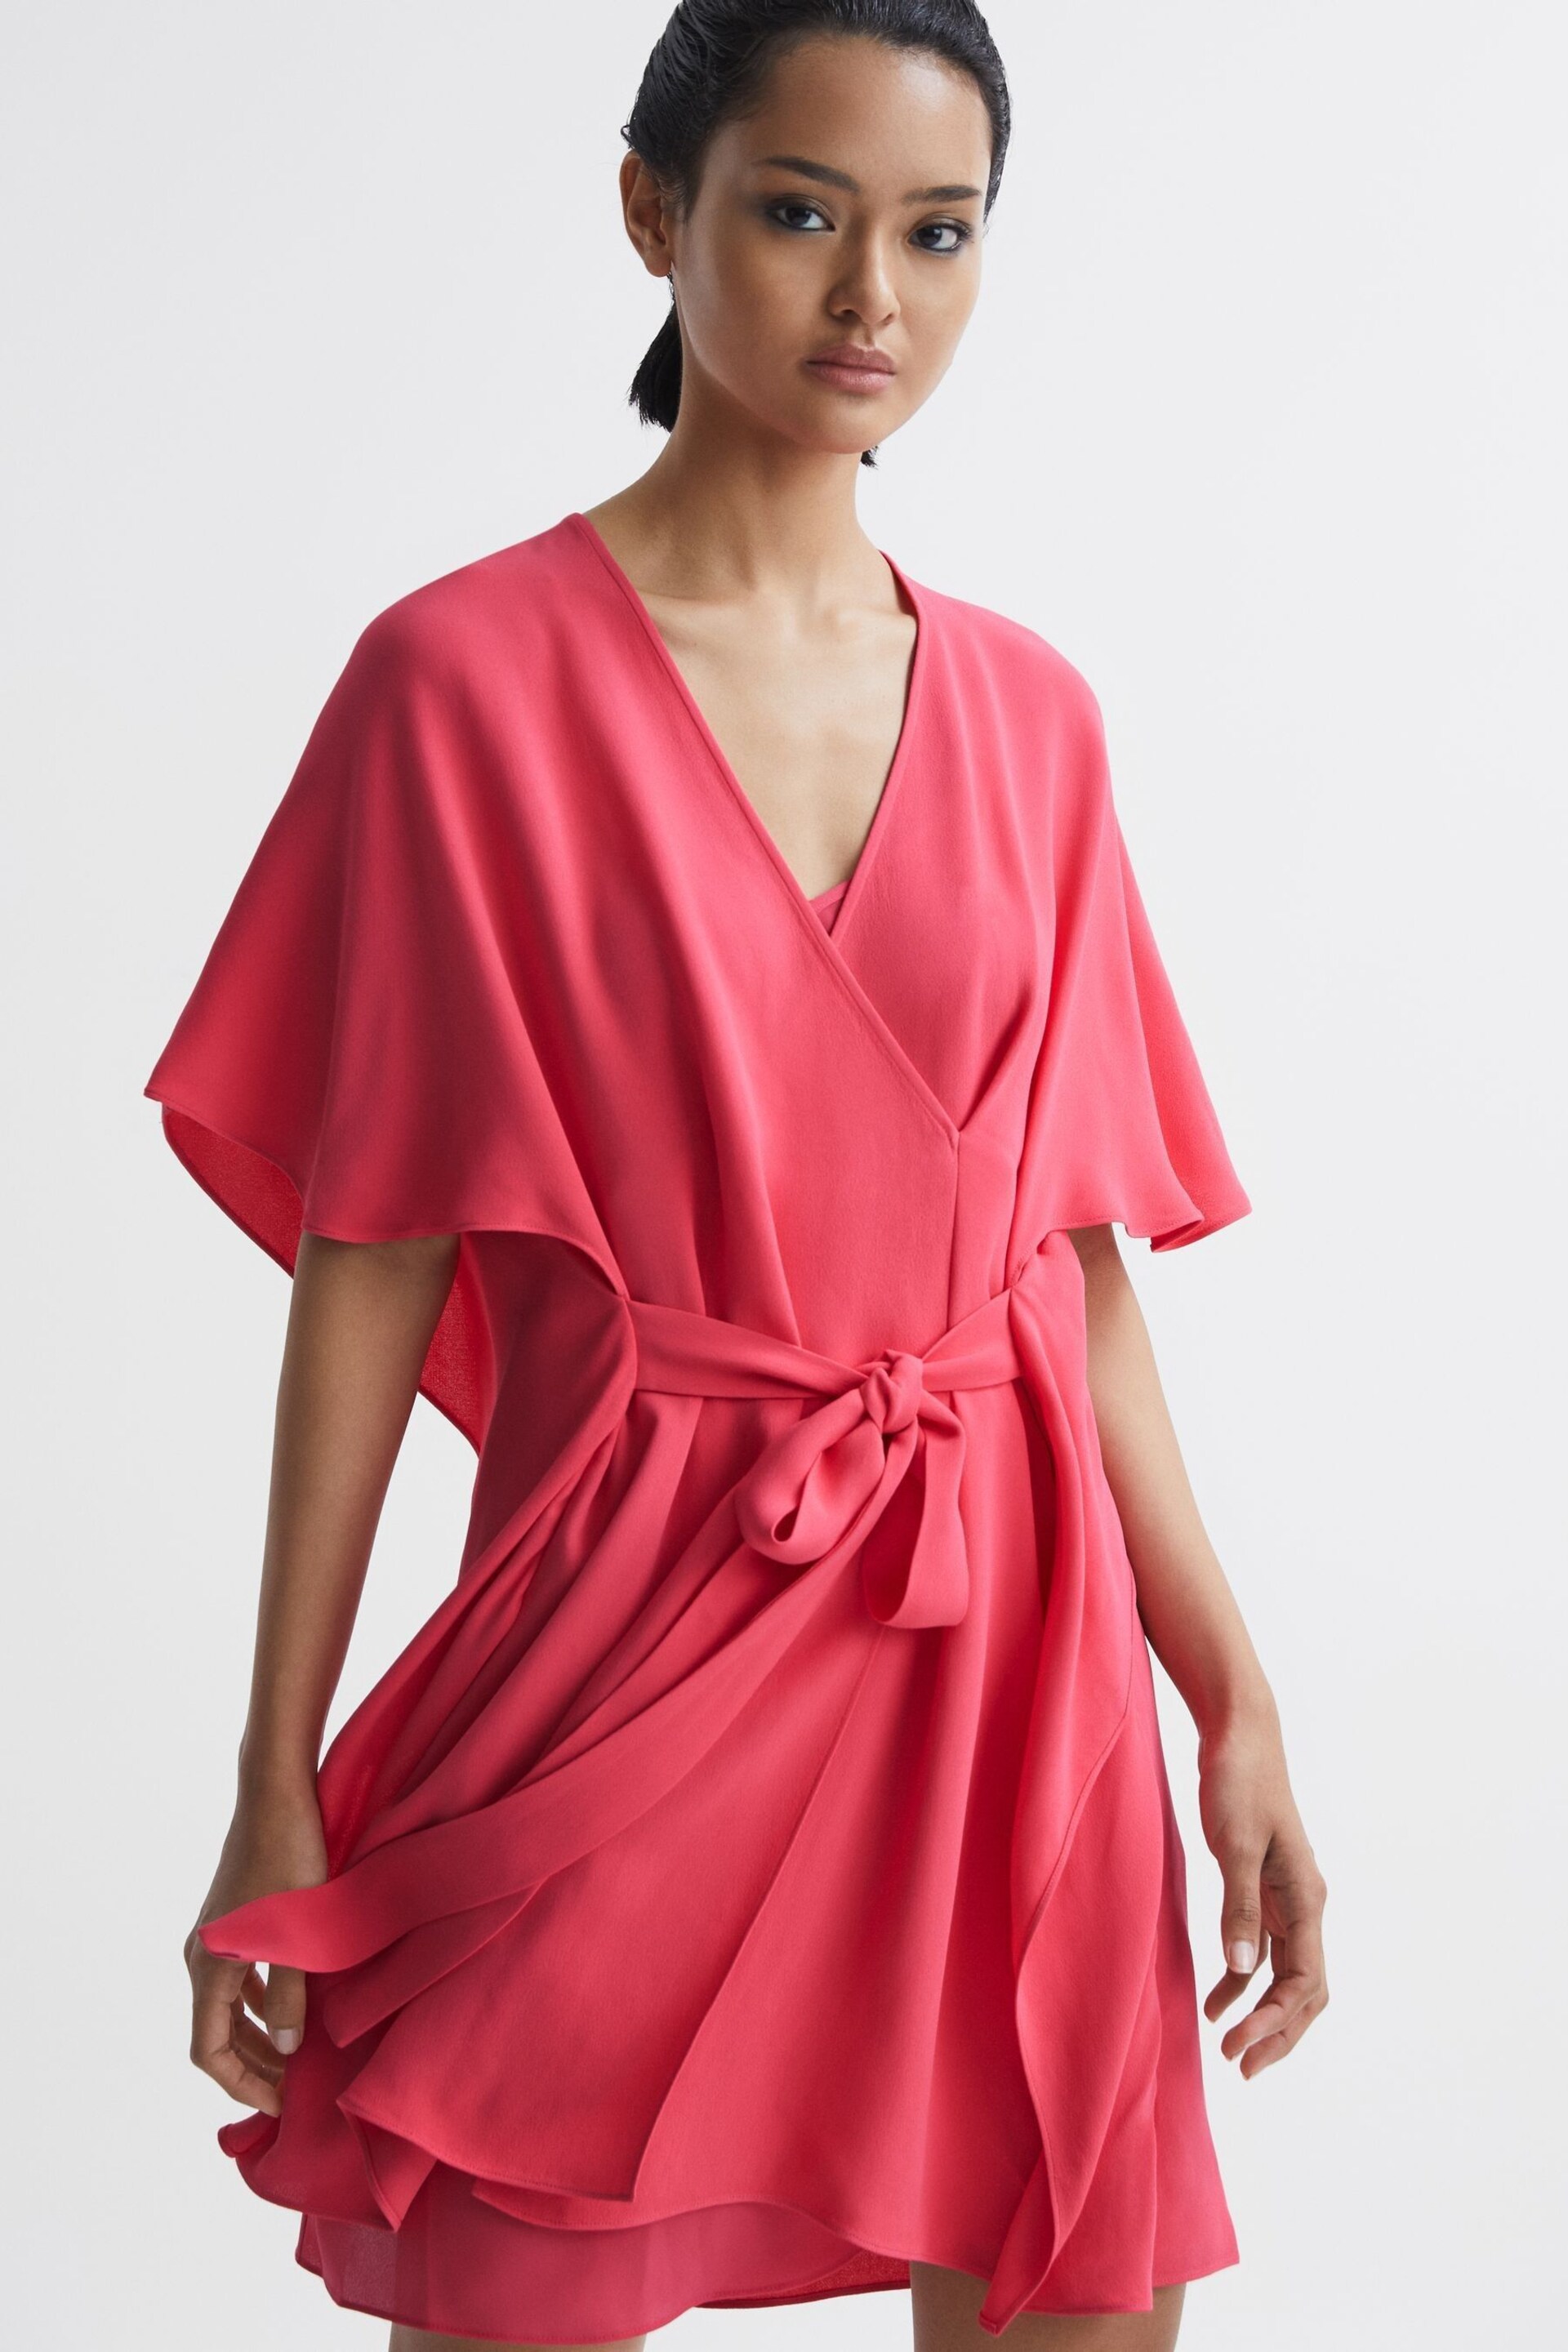 Reiss Pink Peony Relaxed Fit Wrap Mini Dress - Image 1 of 7